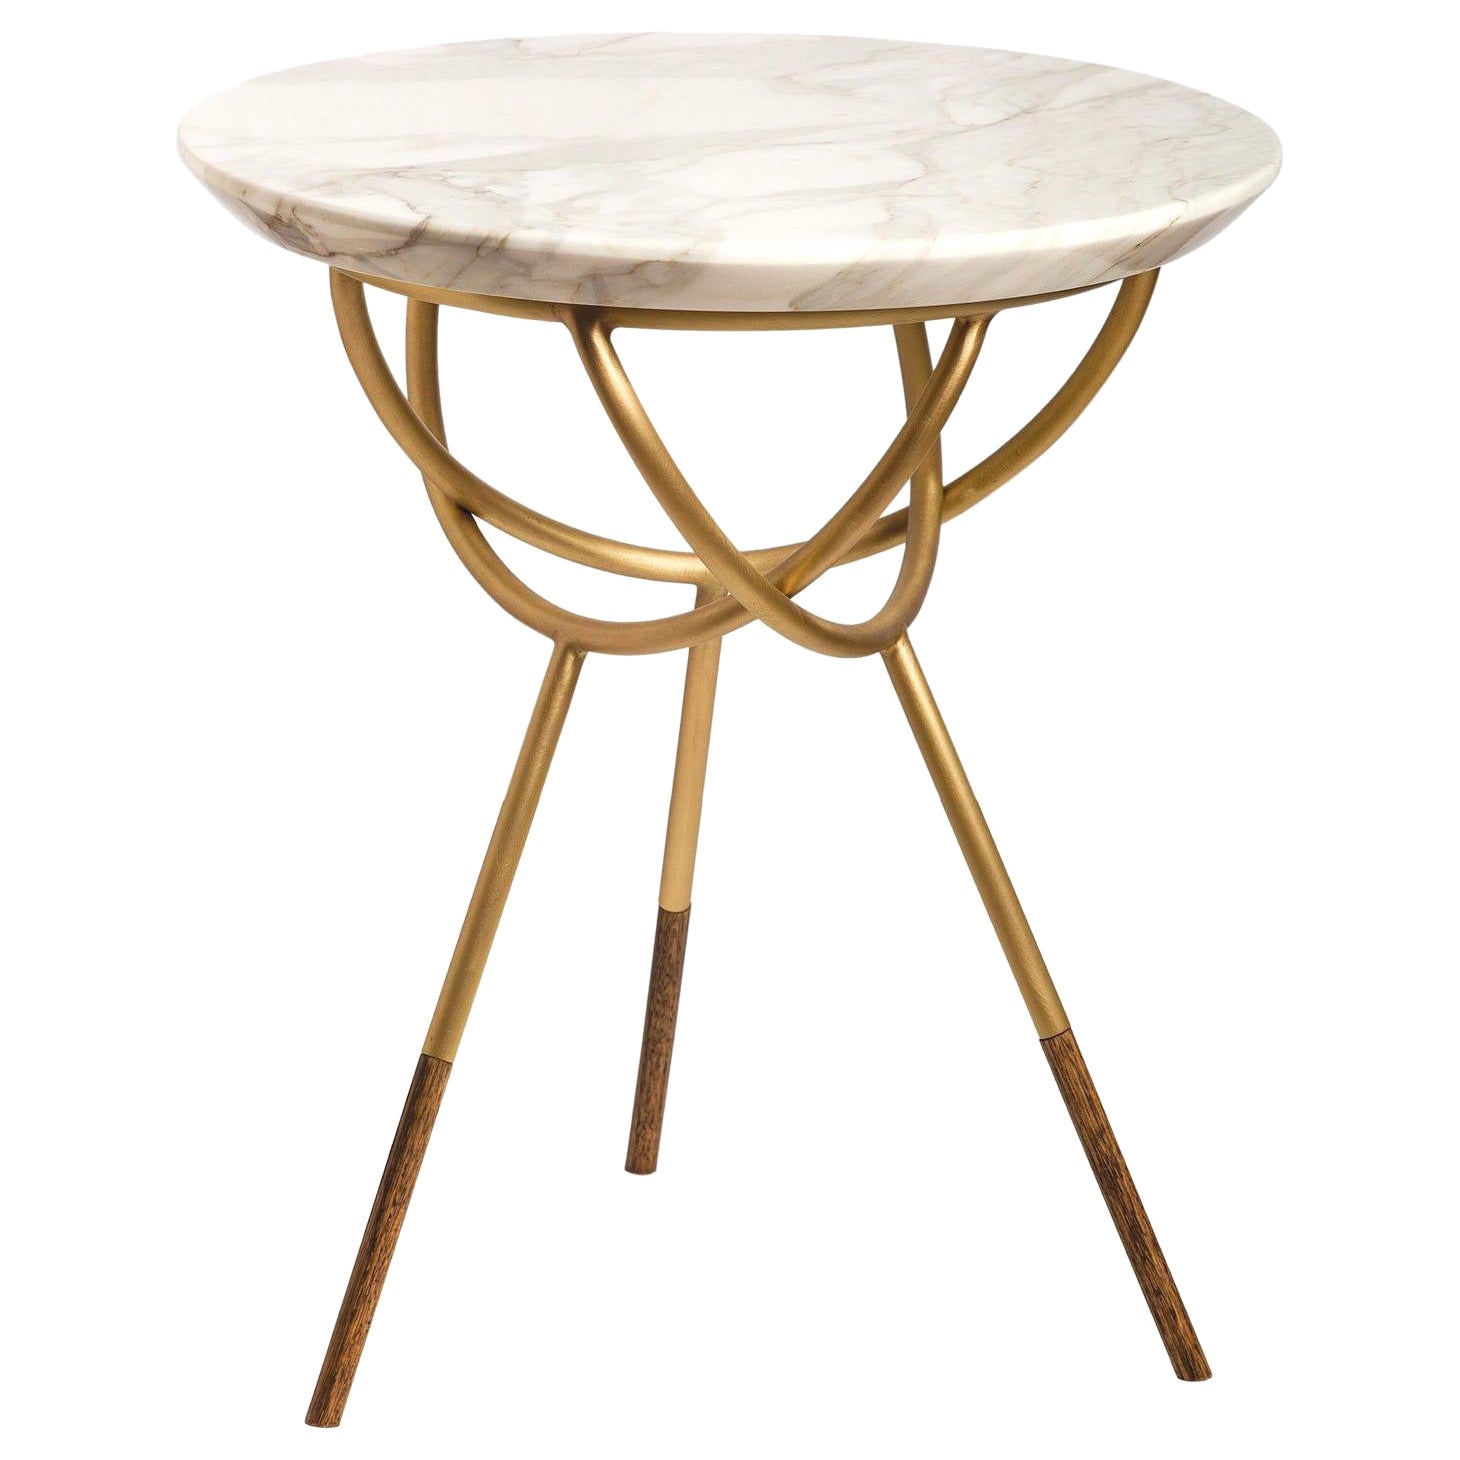 Atlas Brushed Brass Side Table with White Marble Top by Avram Rusu Studio For Sale